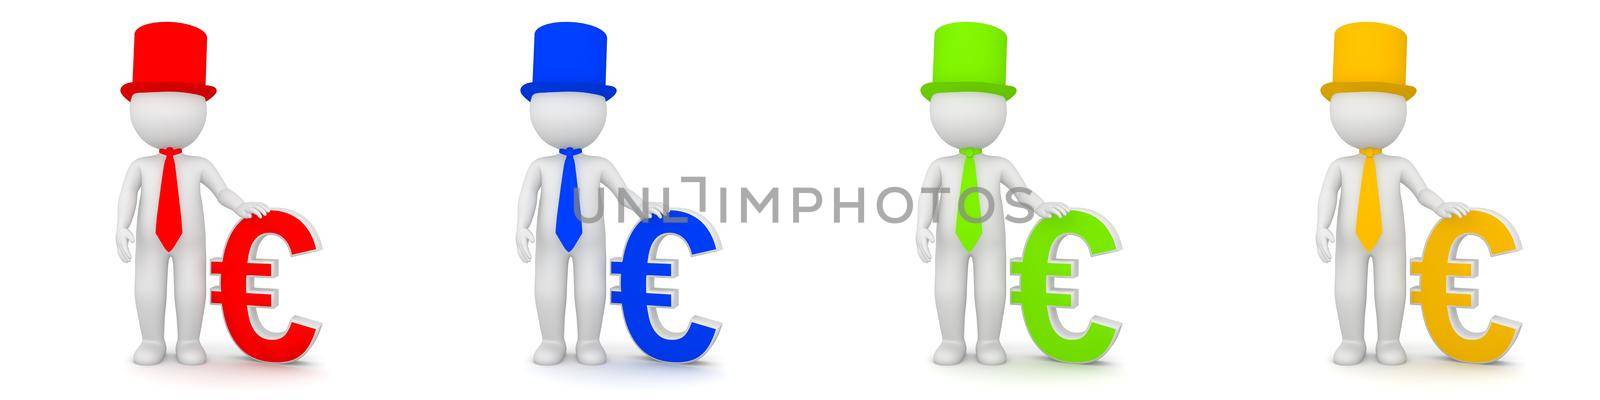 3D Rendering of man with Euro currency as banker - different colors